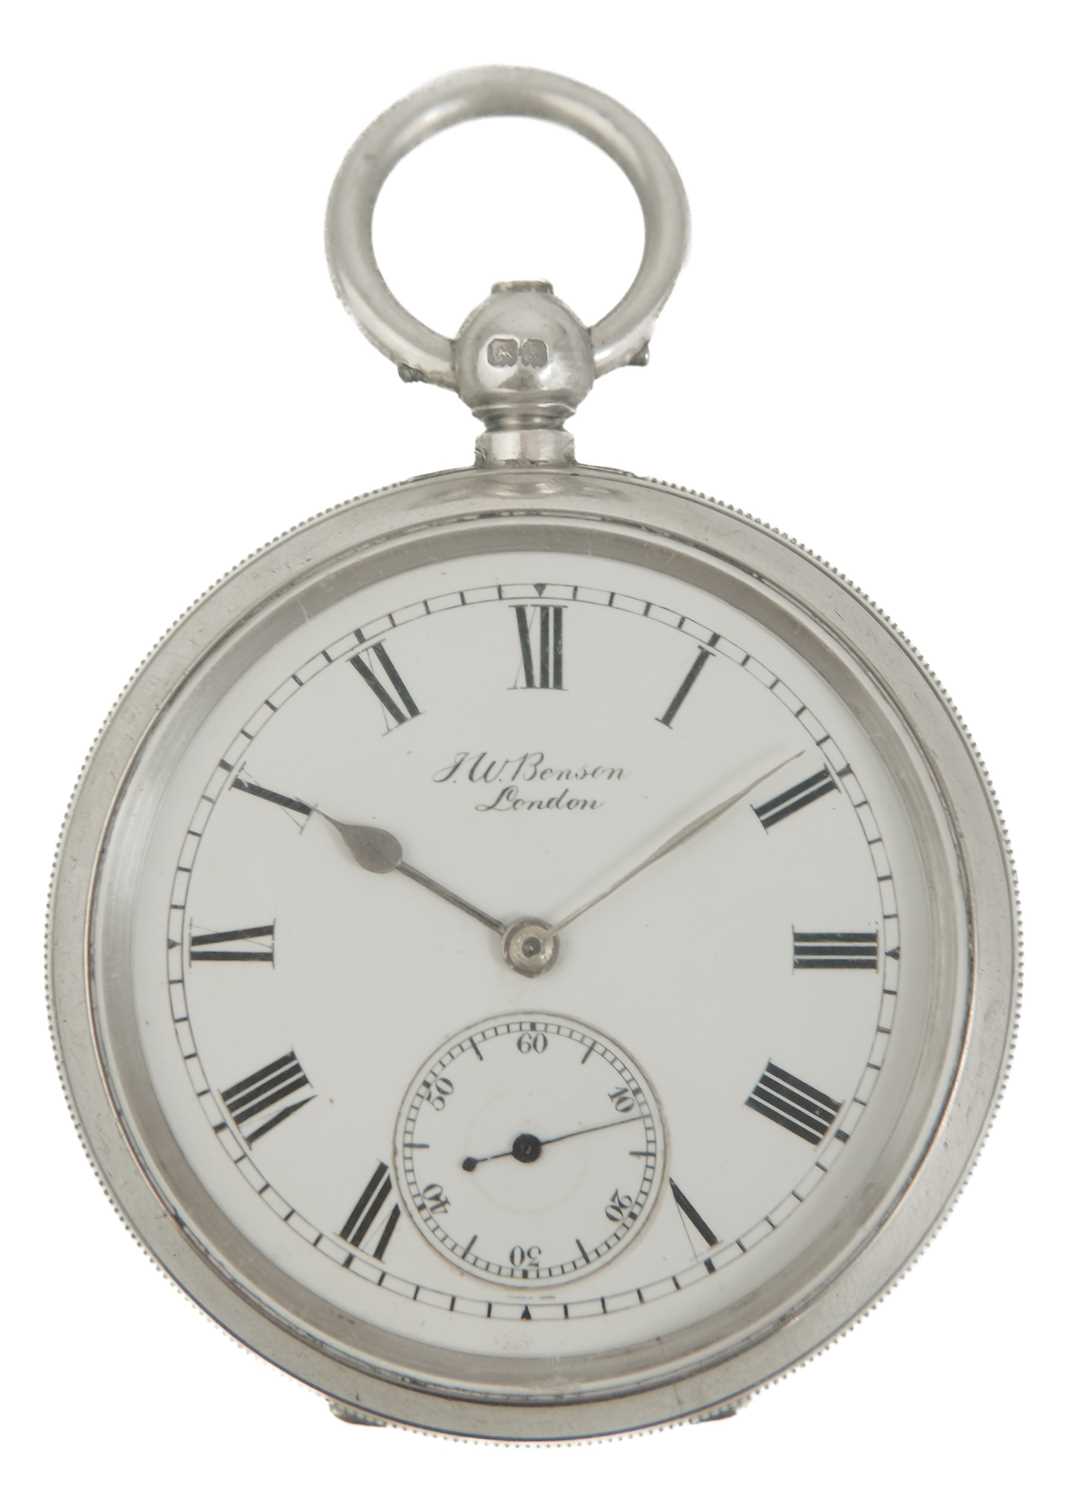 J. W. BENSON - 'THE LUDGATE', a silver cased key wind lever pocket watch. - Image 5 of 8